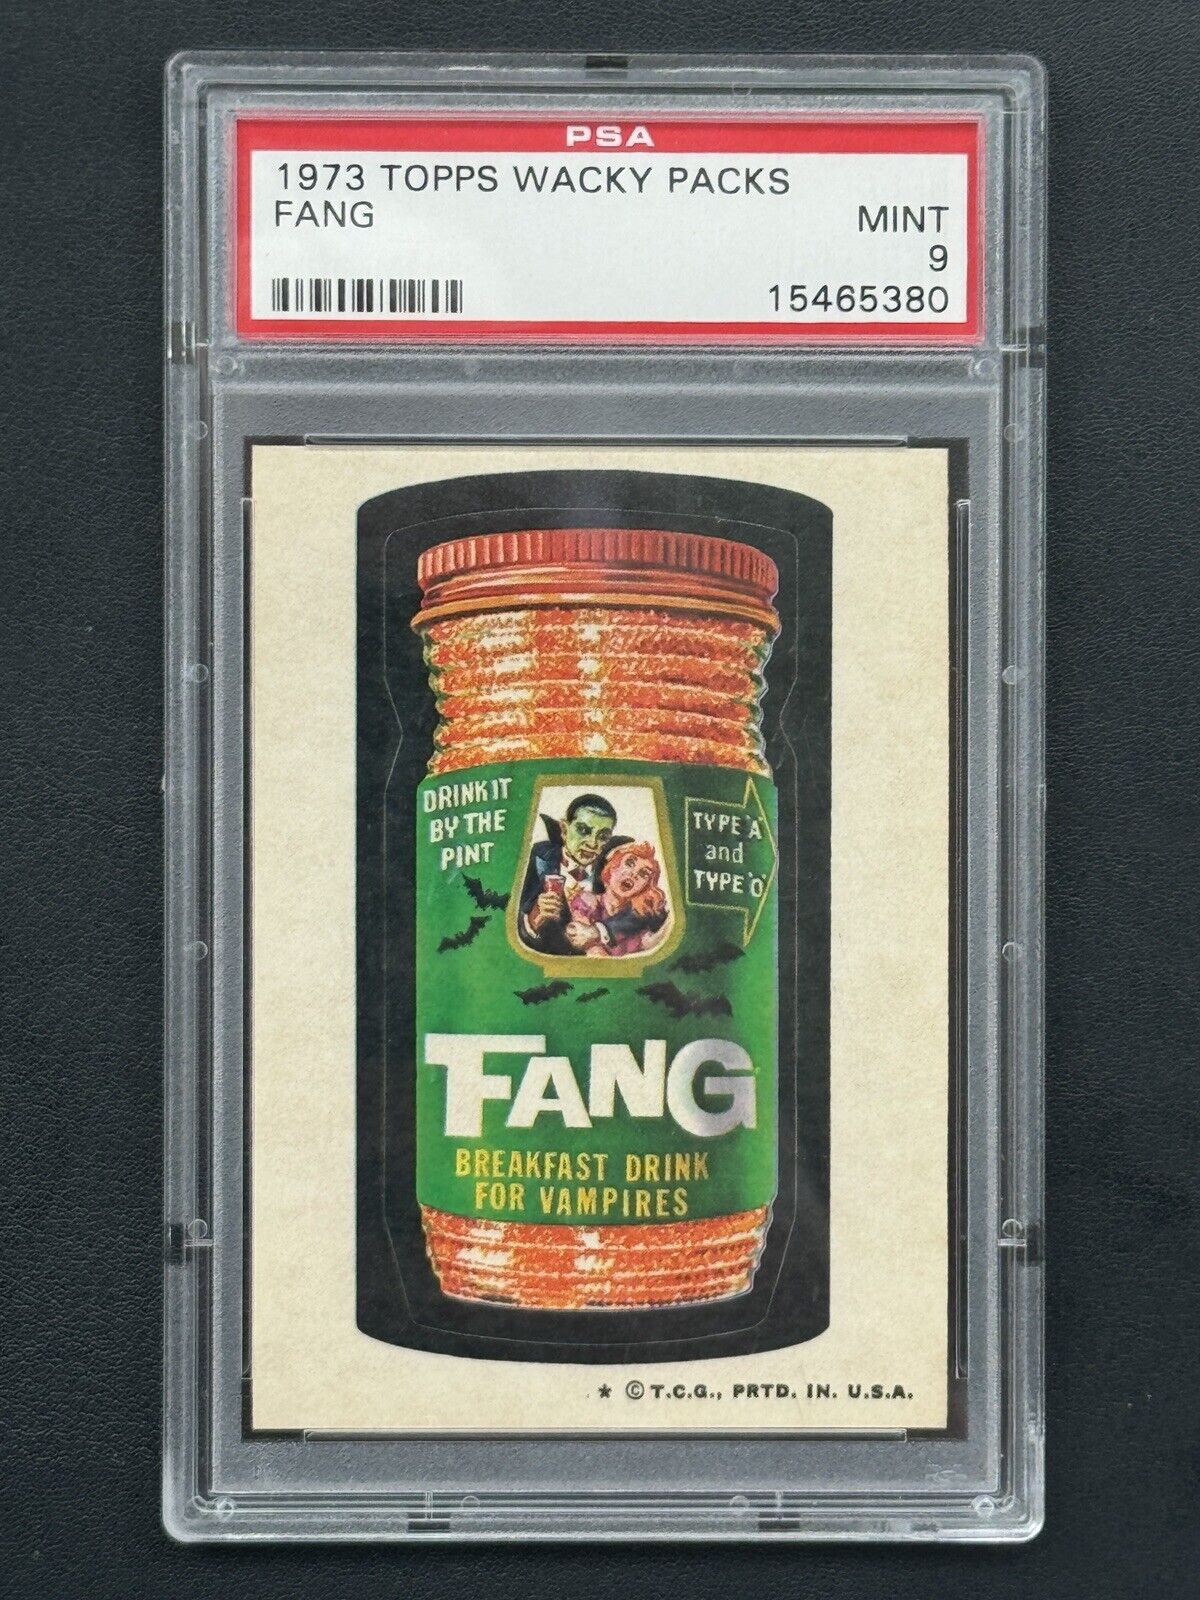 1973 Topps Wacky Packages, Series 4 FANG PSA 9 MINT